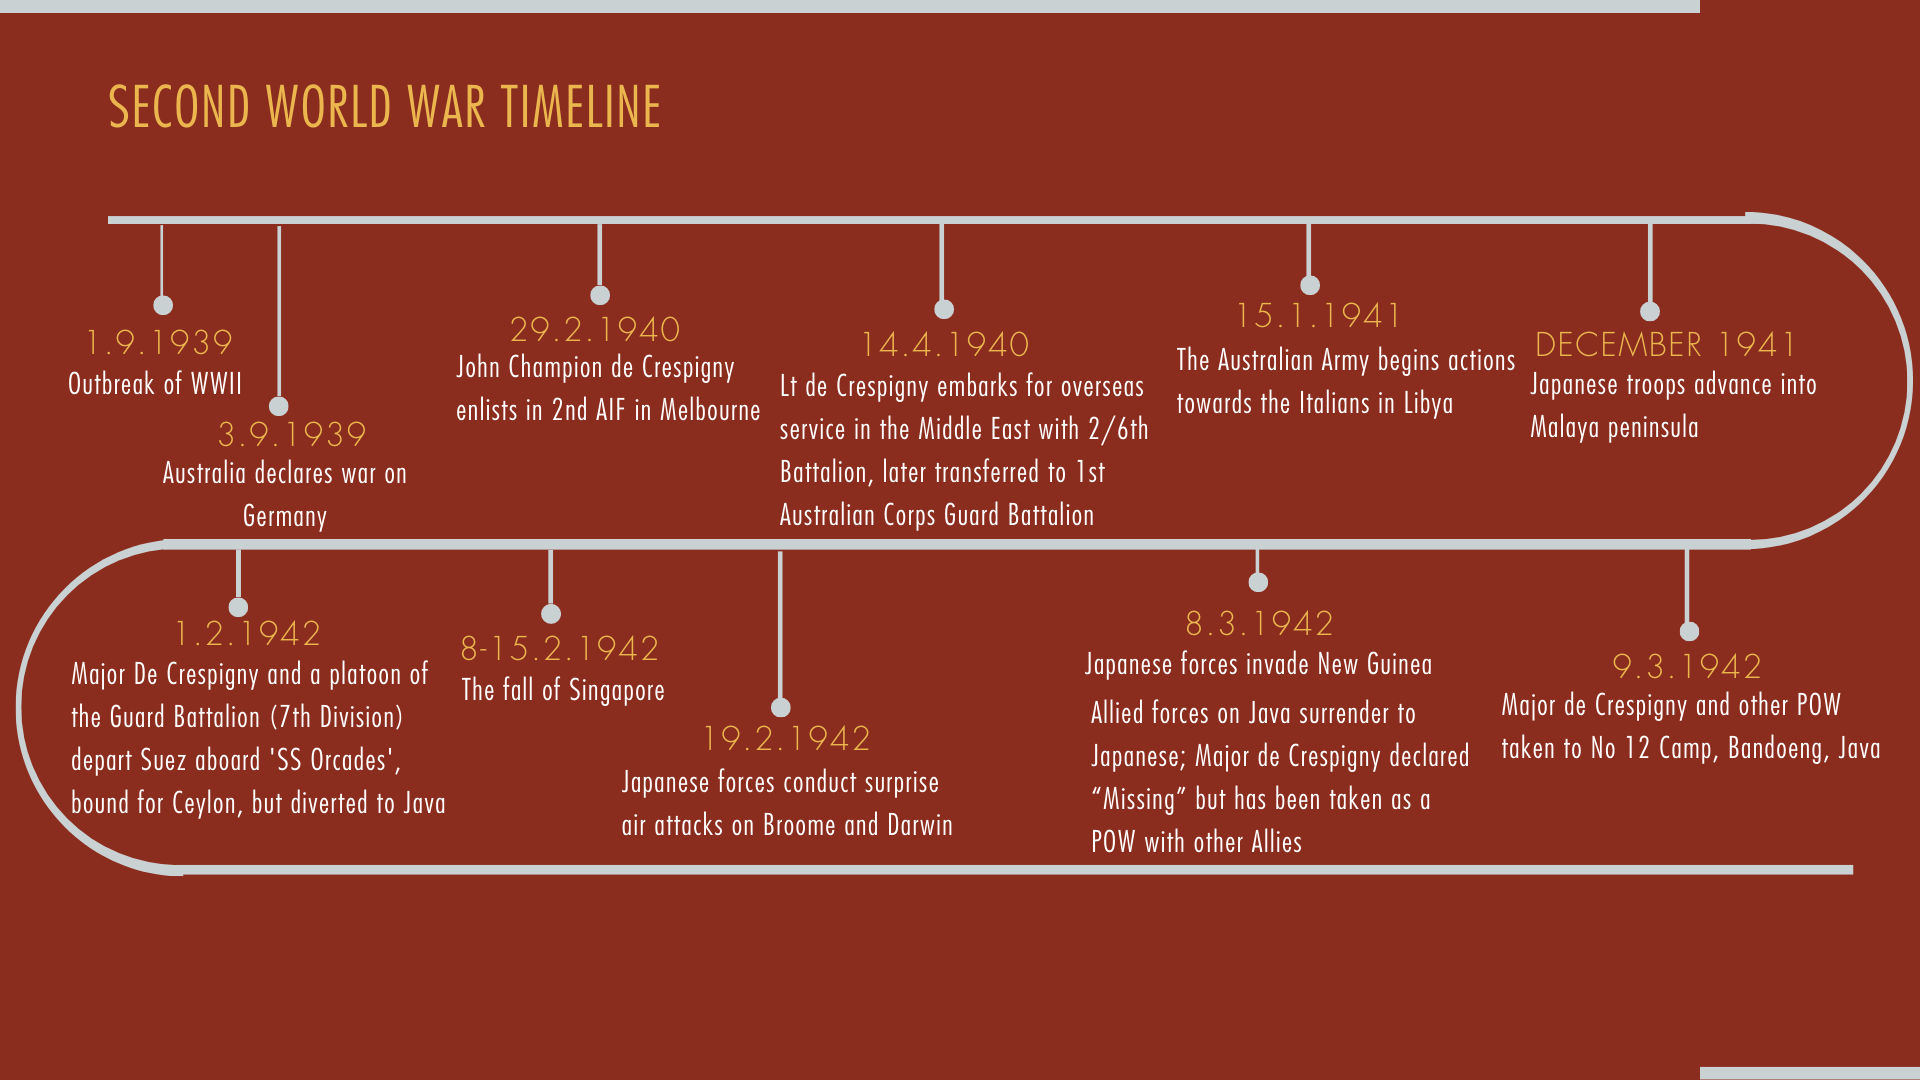 The timeline depicts key moments during WWII between September 1939 and March 1942 